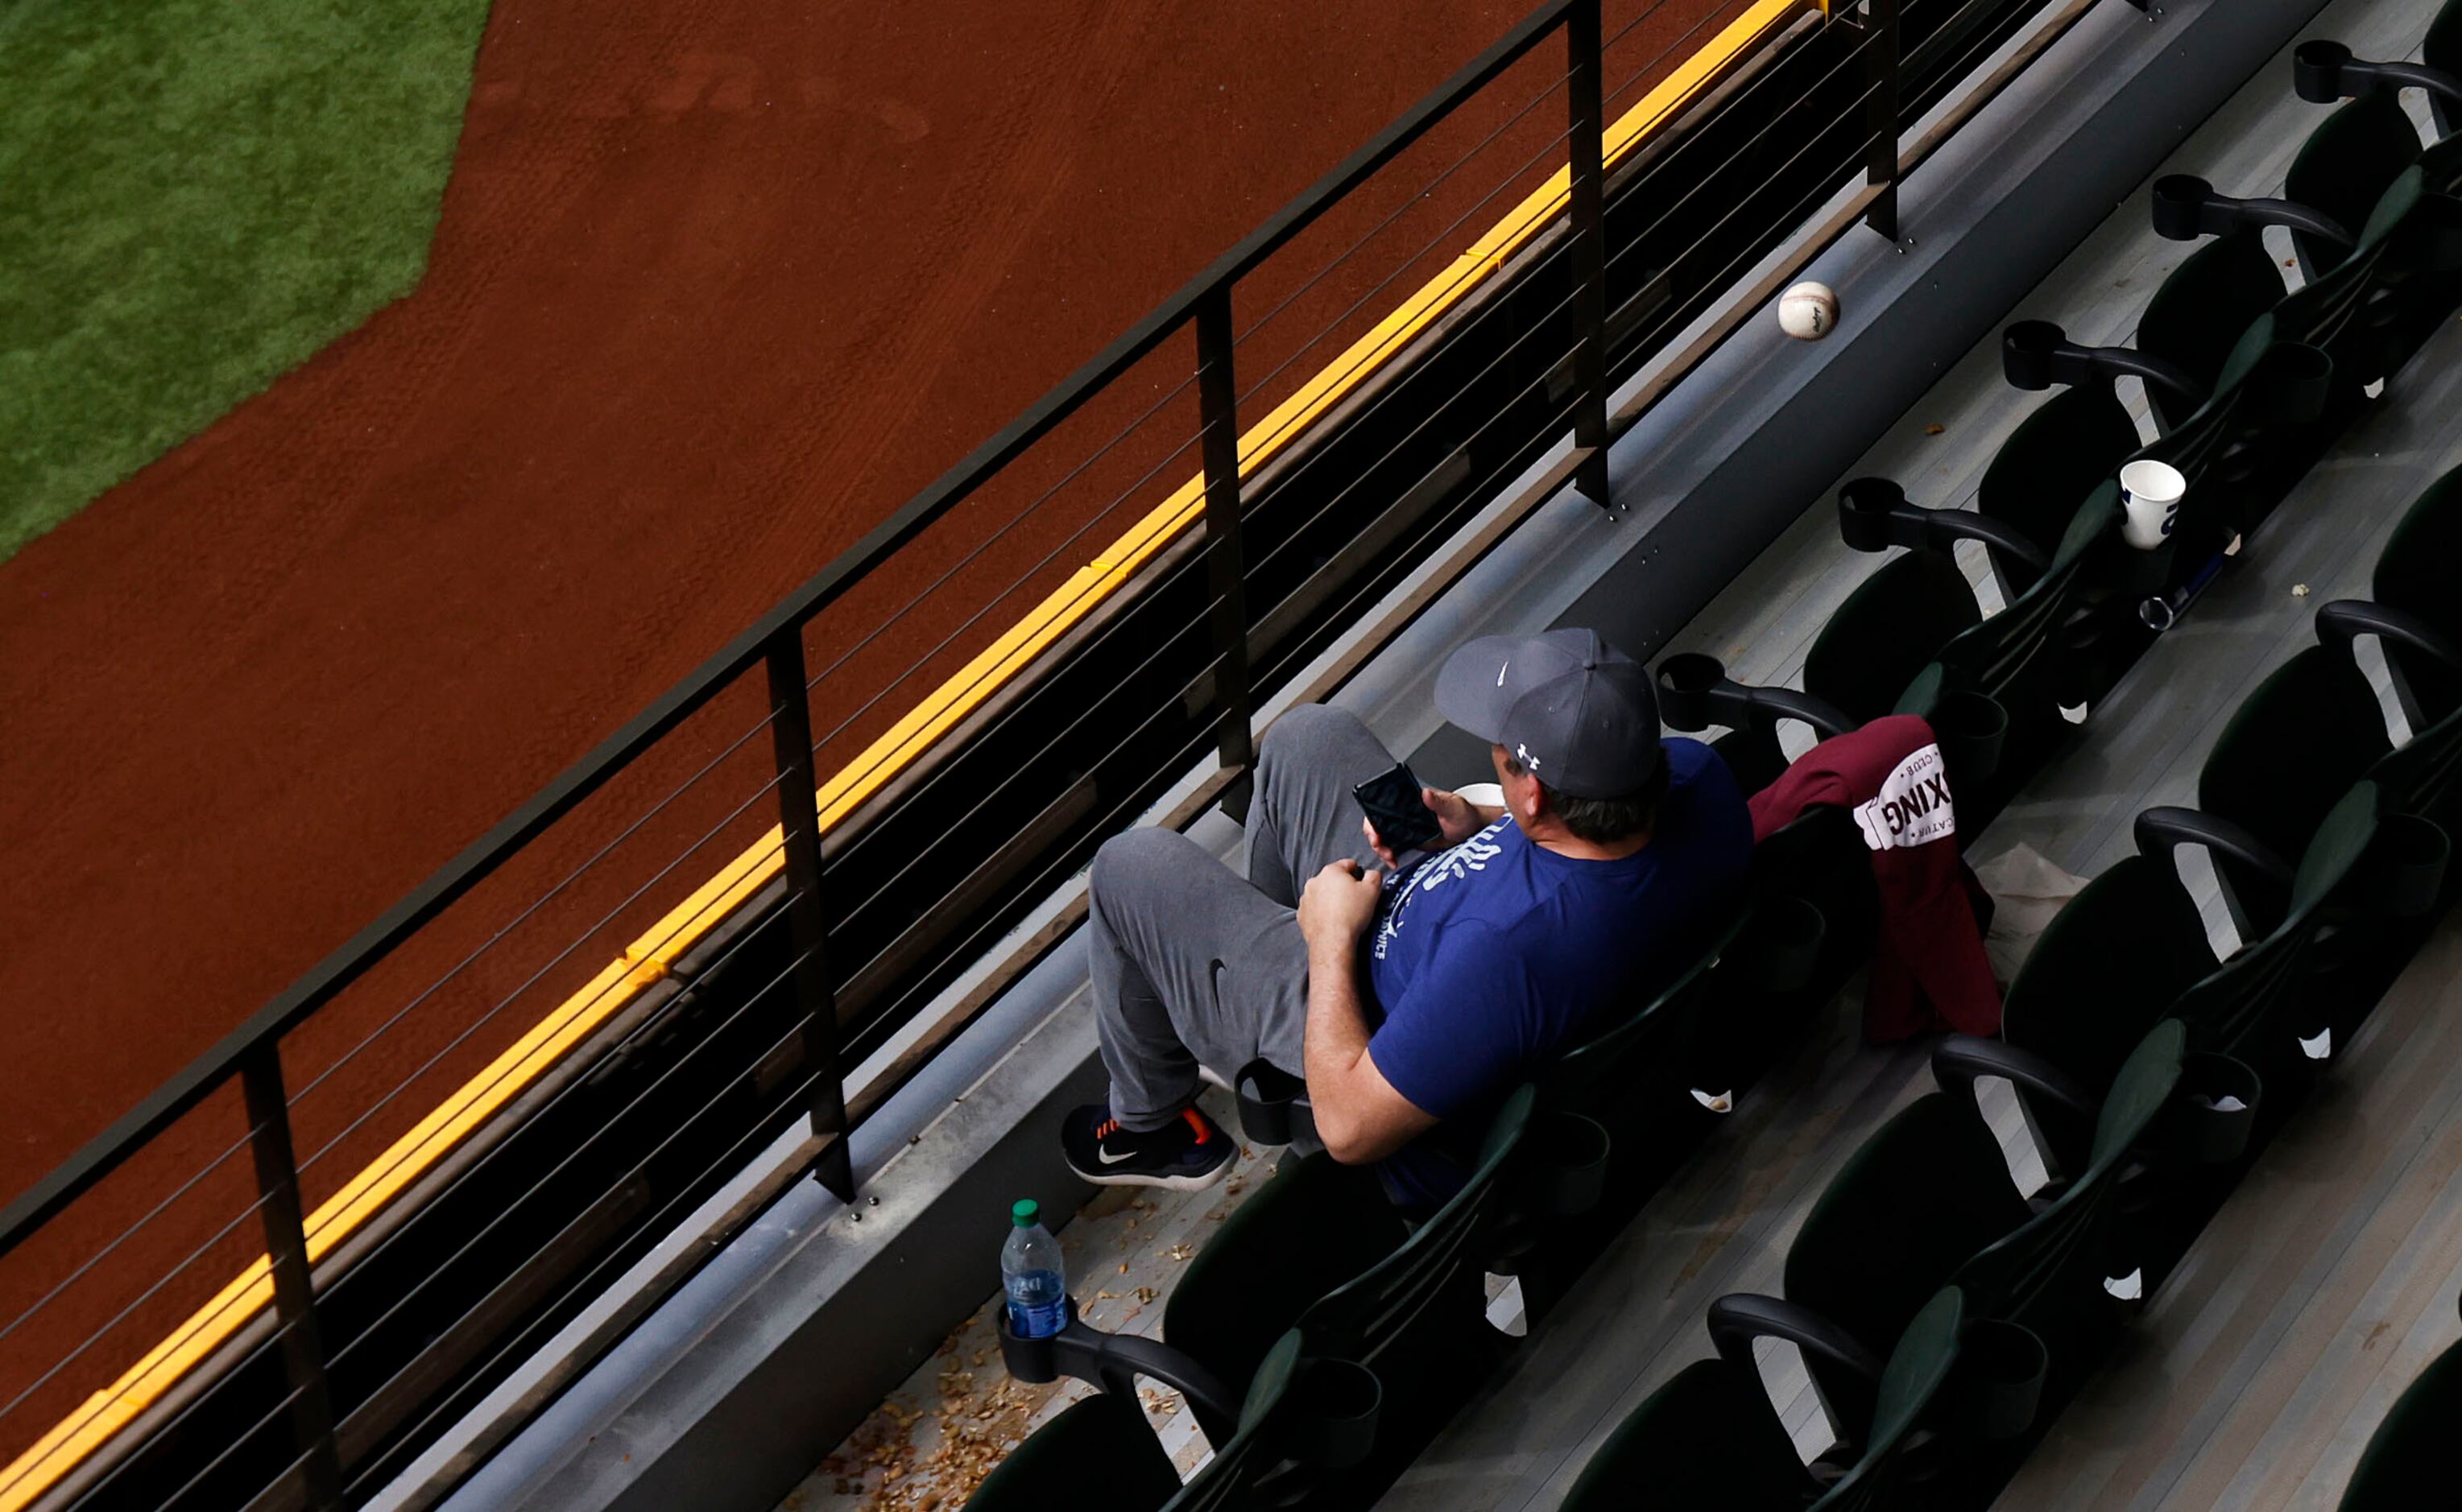 A home run ball off the bat of Texas Rangers batter Andy Ibáñez nearly hits a fan sitting in...